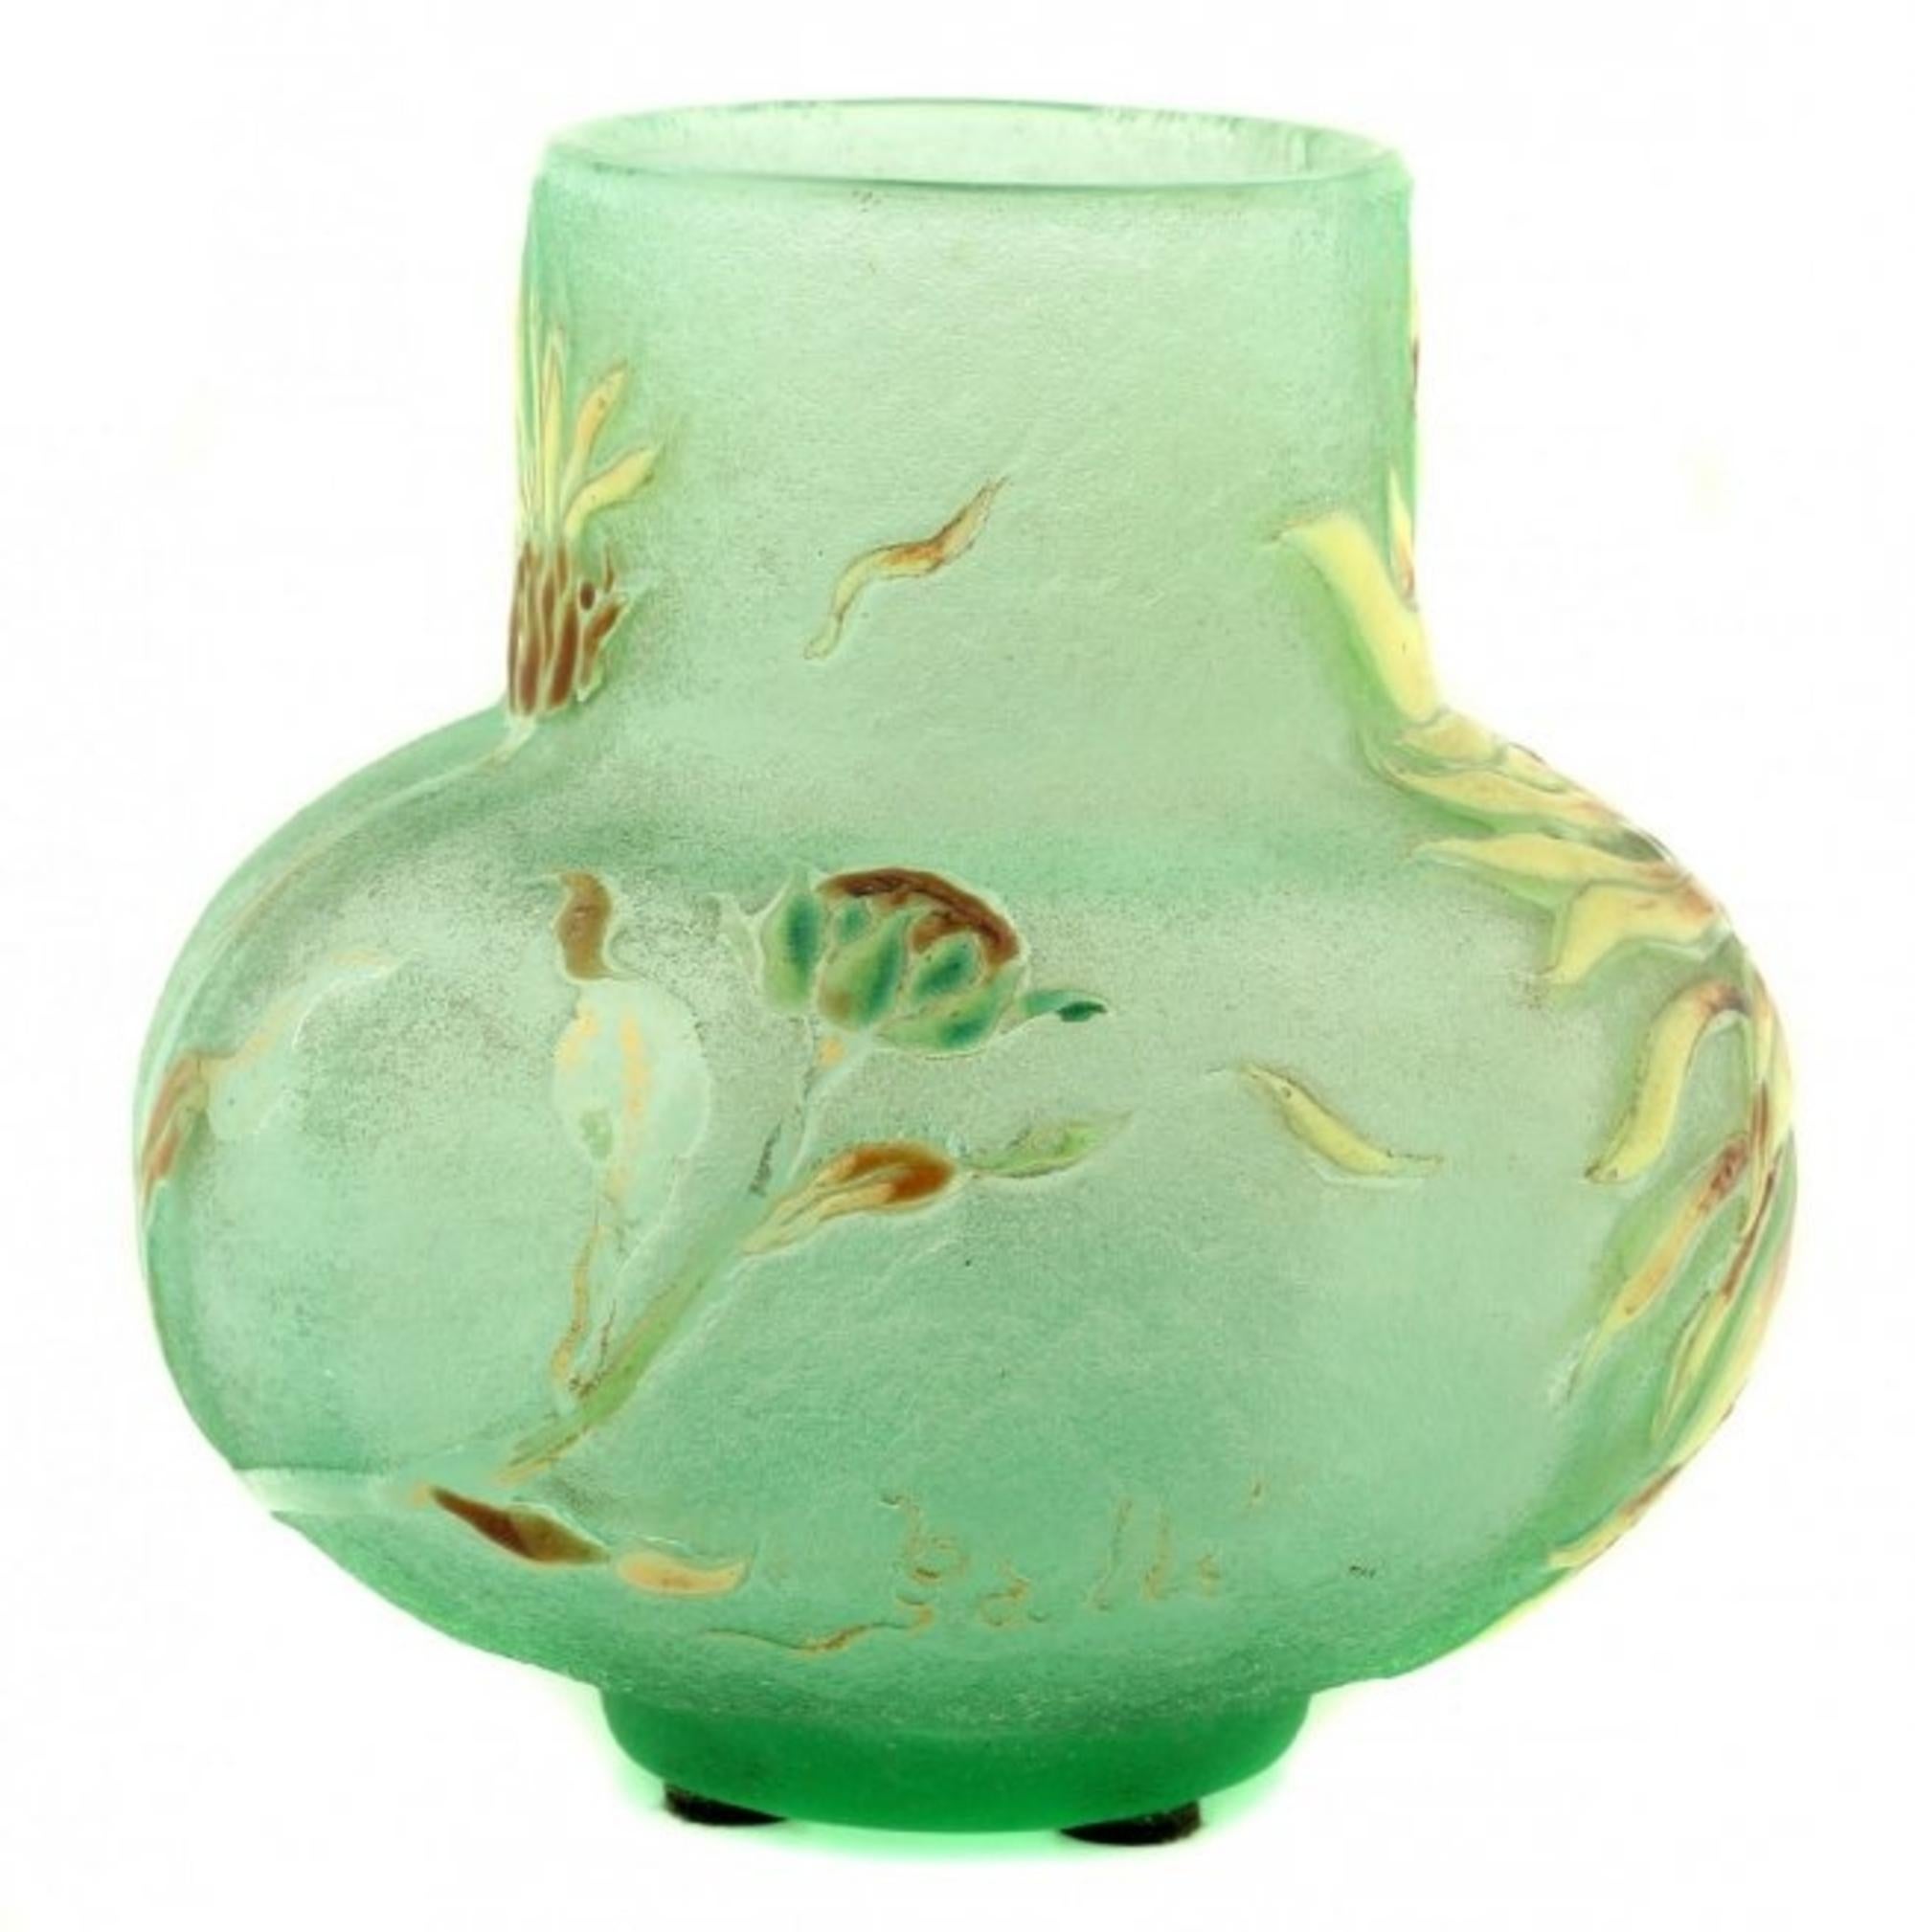 Property of a private collector
Émile Gallé (1846-1904)
A fine acid-etched enameled glass vase, France, circa 1884-1889
signed Gallé ,
Measures: Height 4 7/8 in., width 4 3/4 in. ,
H 12.19 cm., W 12.06 cm.
Literature:
Alastair Duncan and